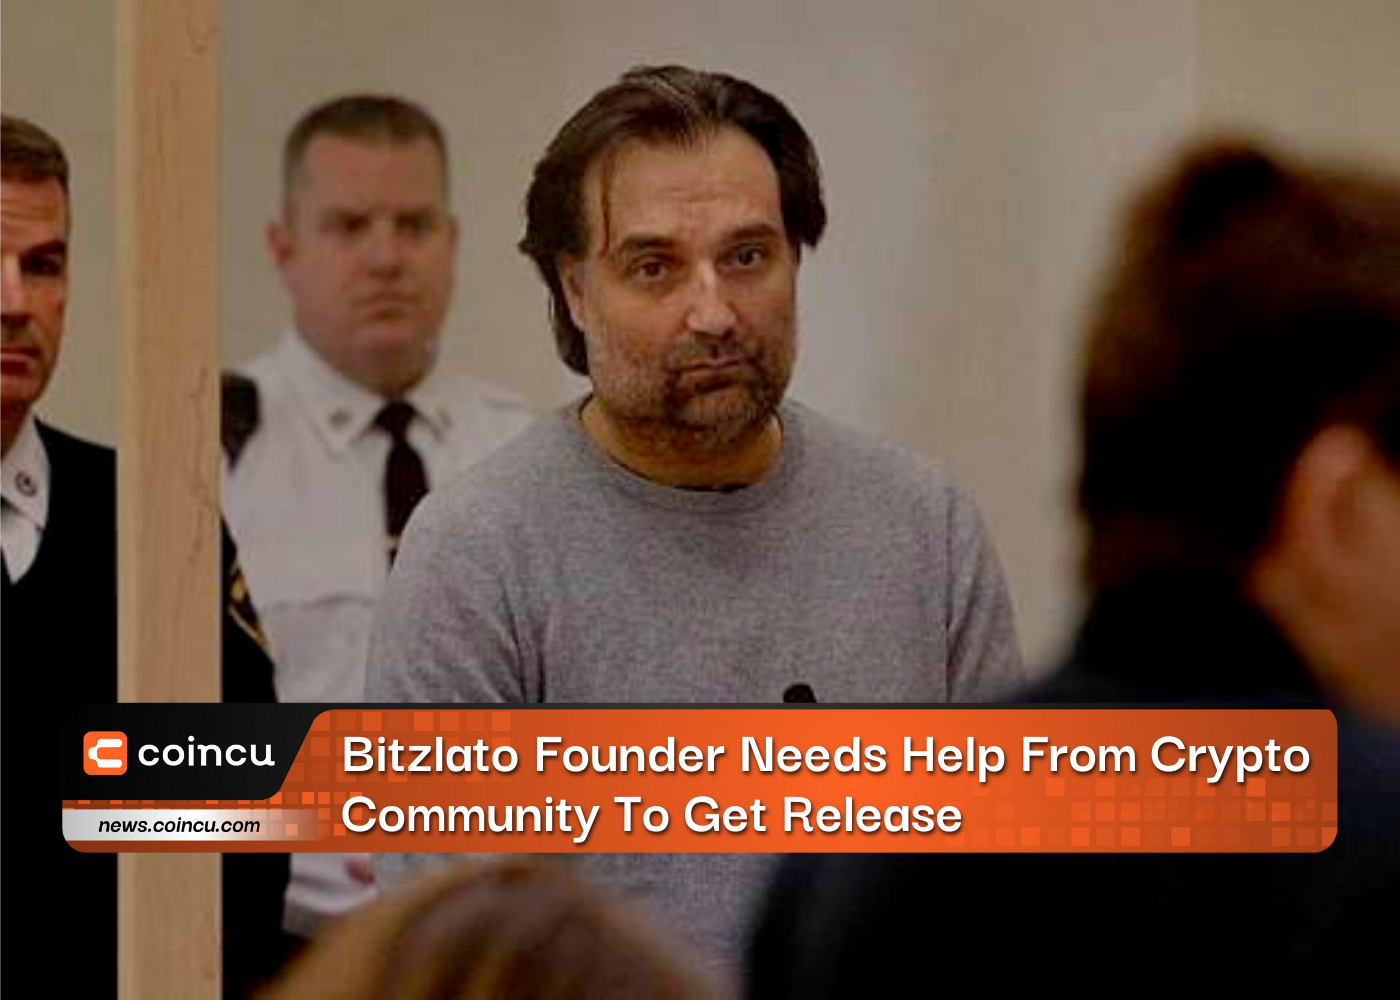 Bitzlato Founder Needs Help From Crypto Community To Get Release